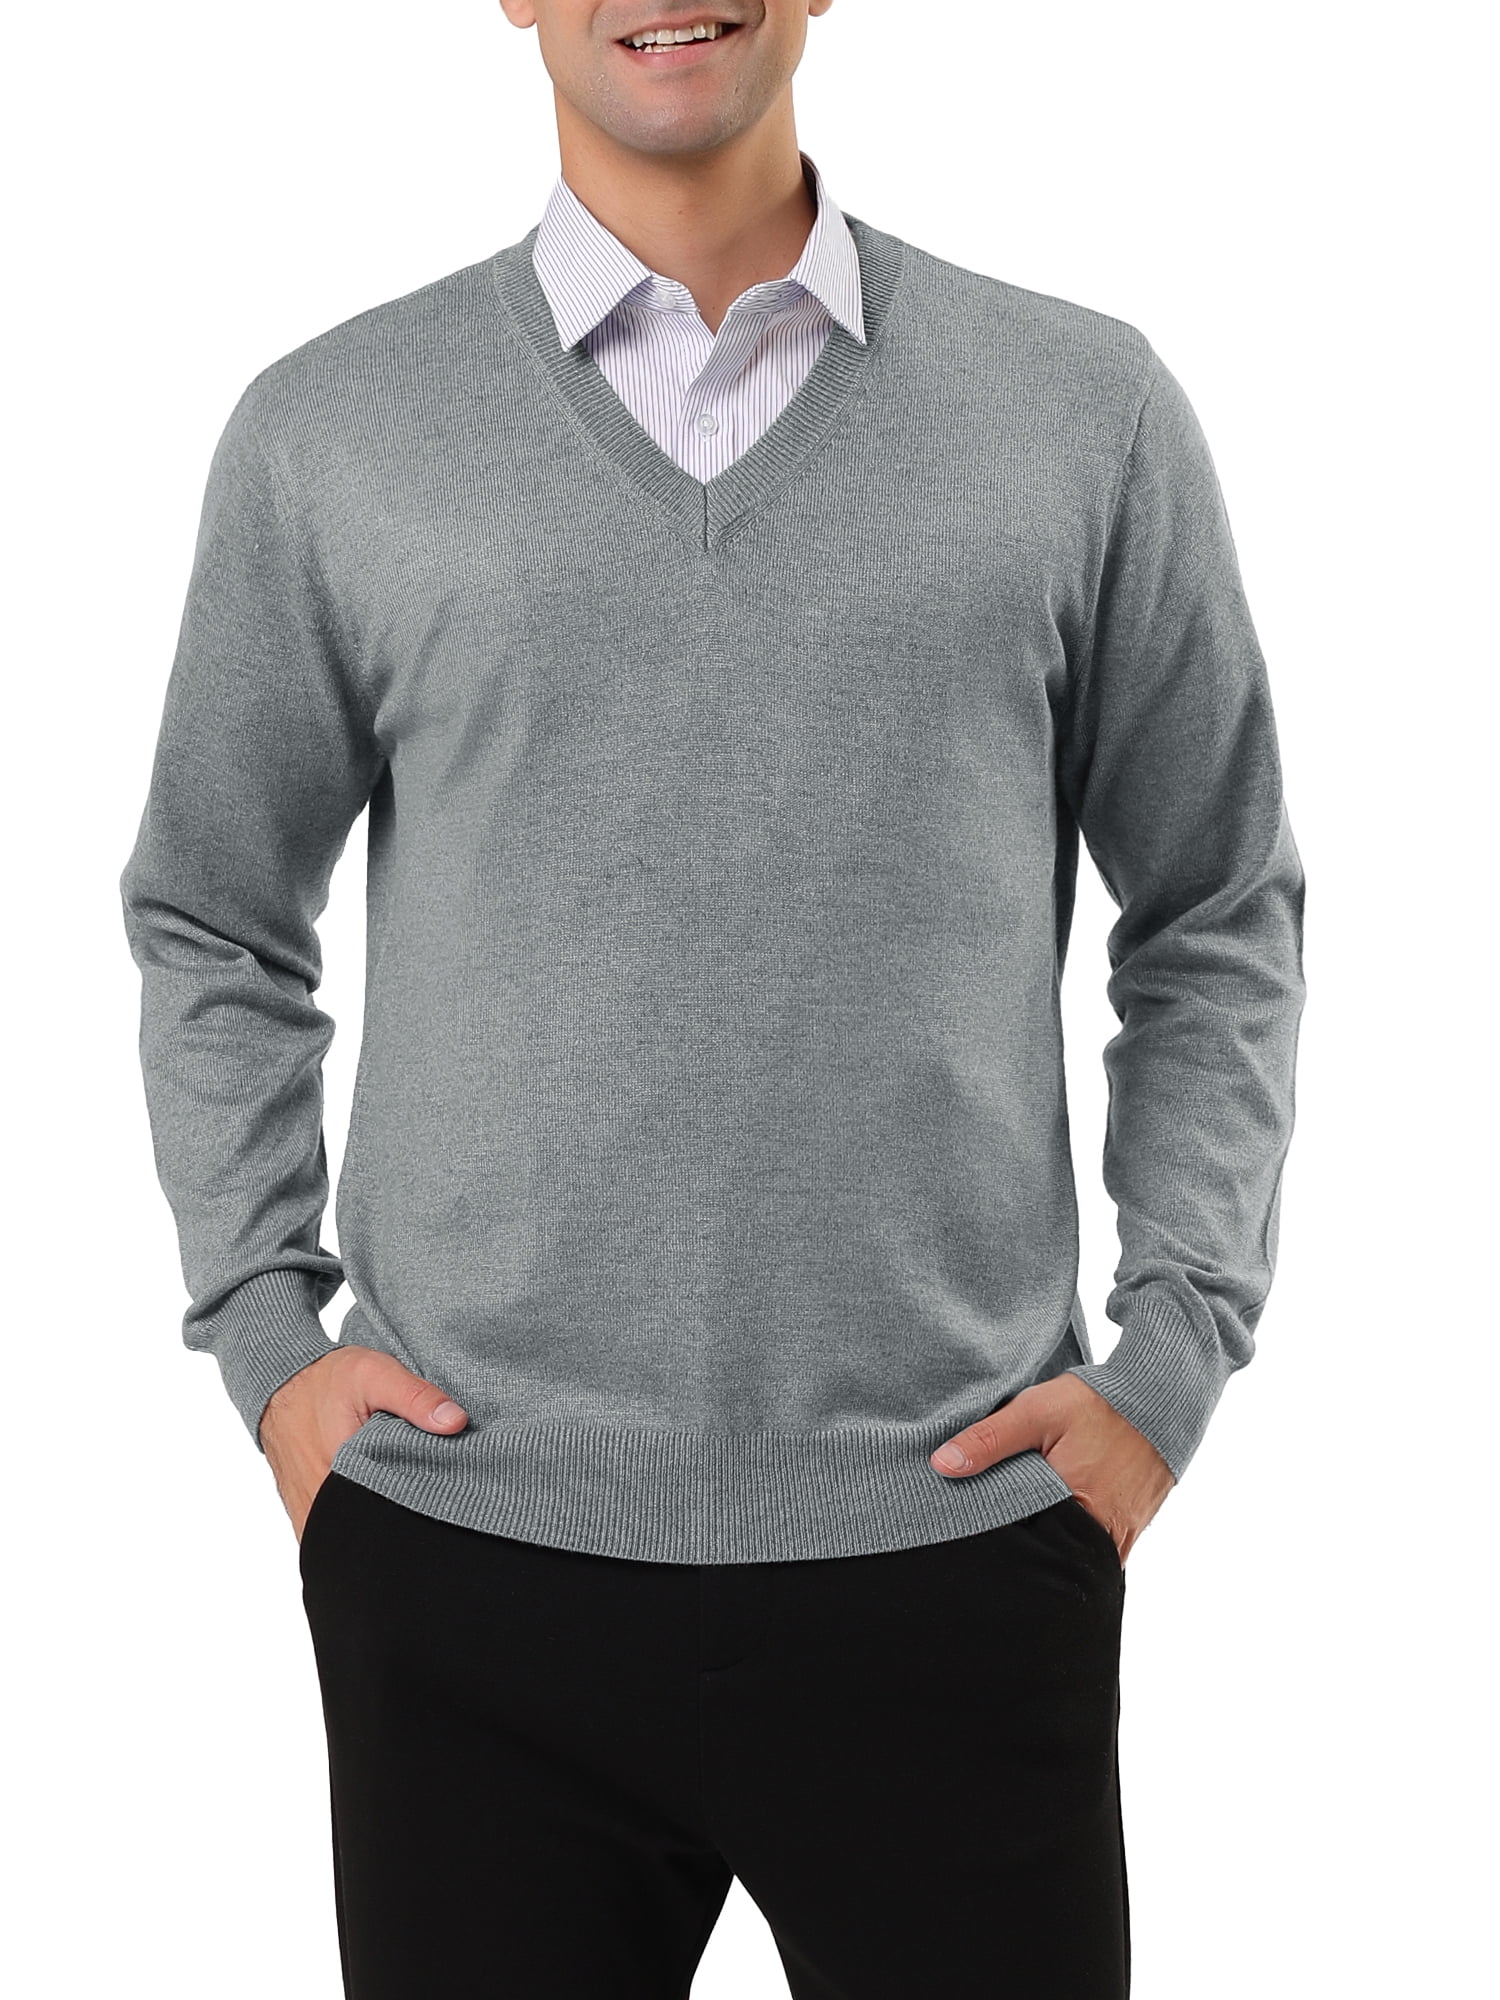 TR Men's Check Rib Sweater with Zip Collar by 9 Crowns Essentials 